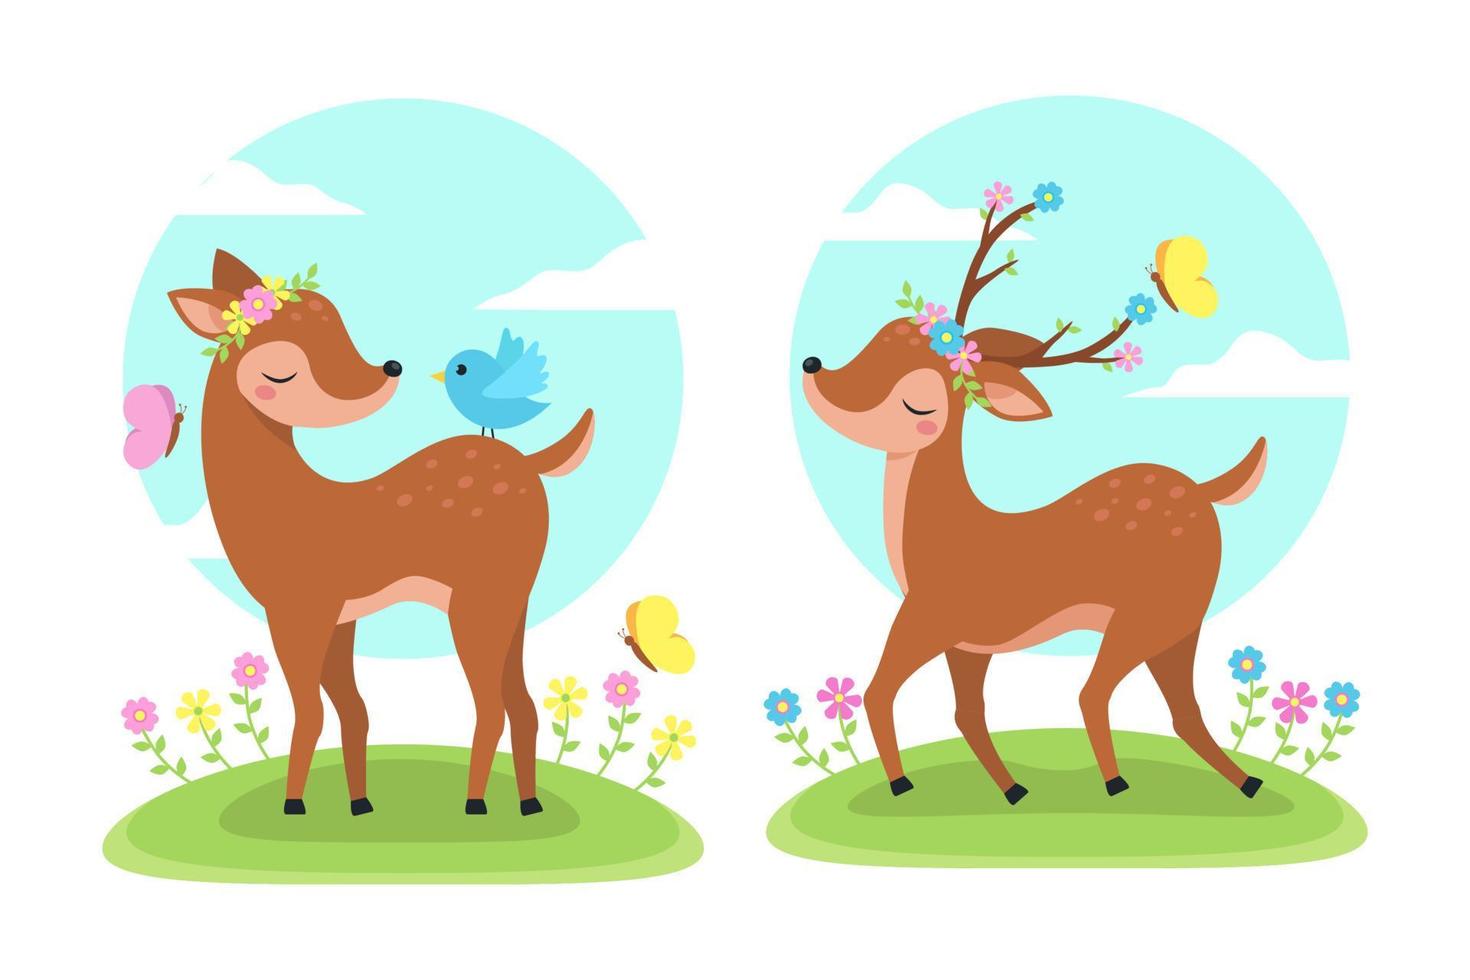 Deer in the nature of spring illustration vector